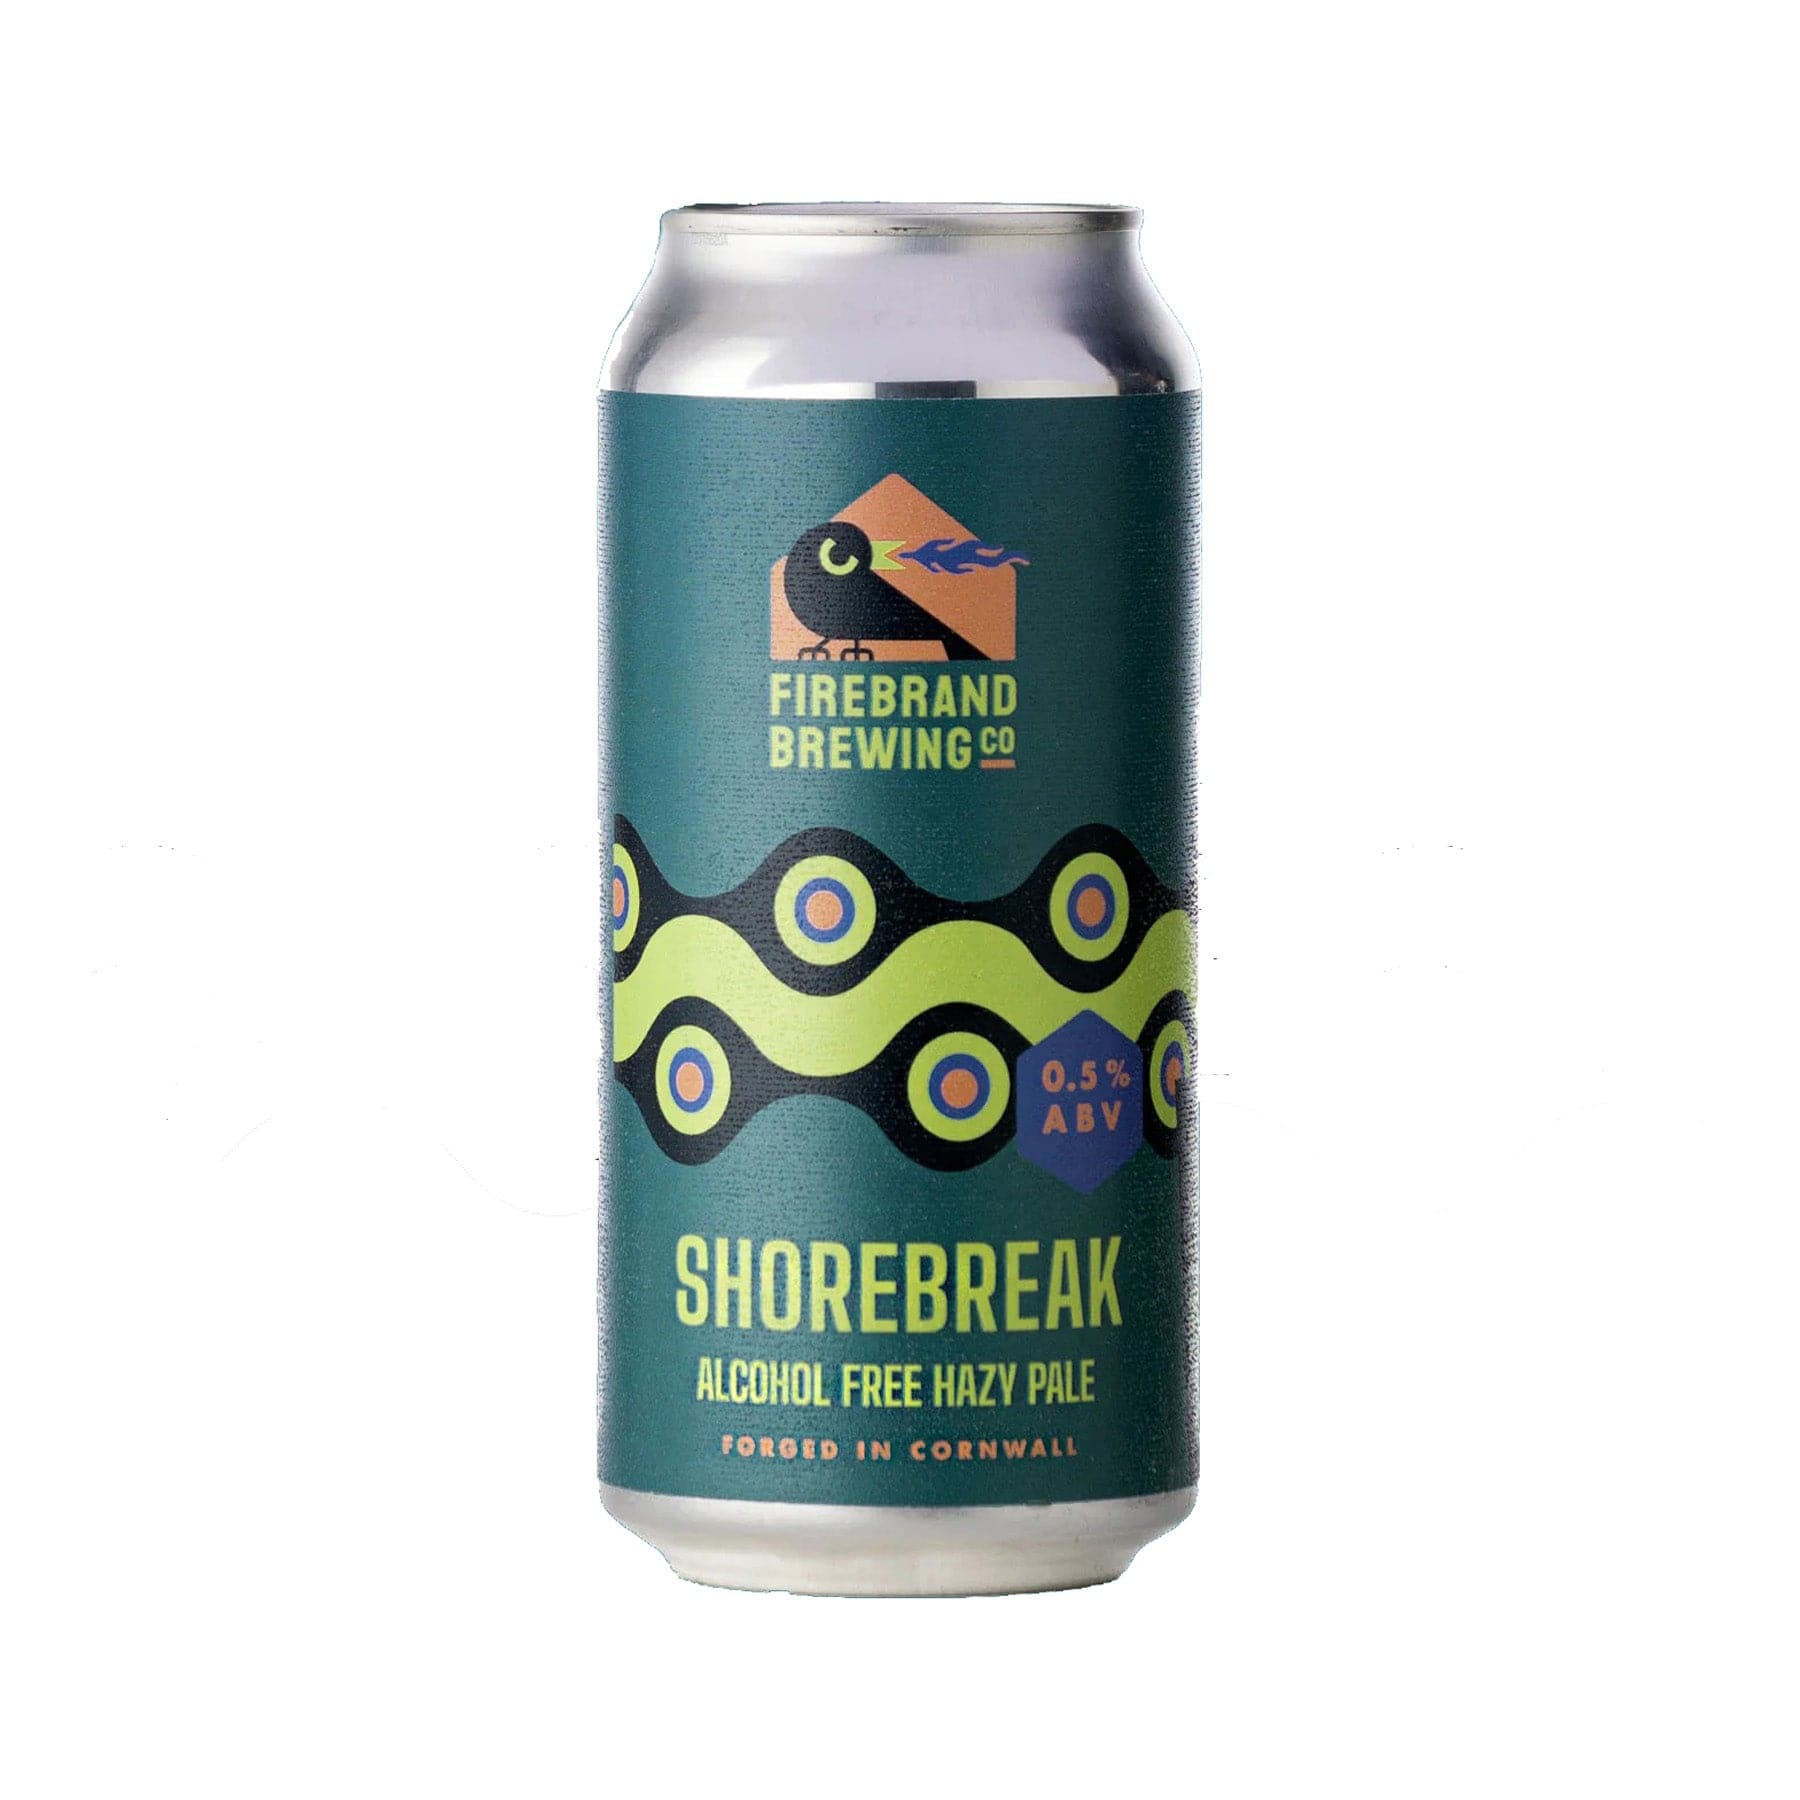 Firebrand Brewing Co Shorebreak alcohol-free hazy pale ale can with 0.5% ABV, forged in Cornwall, with a teal label and abstract eye design